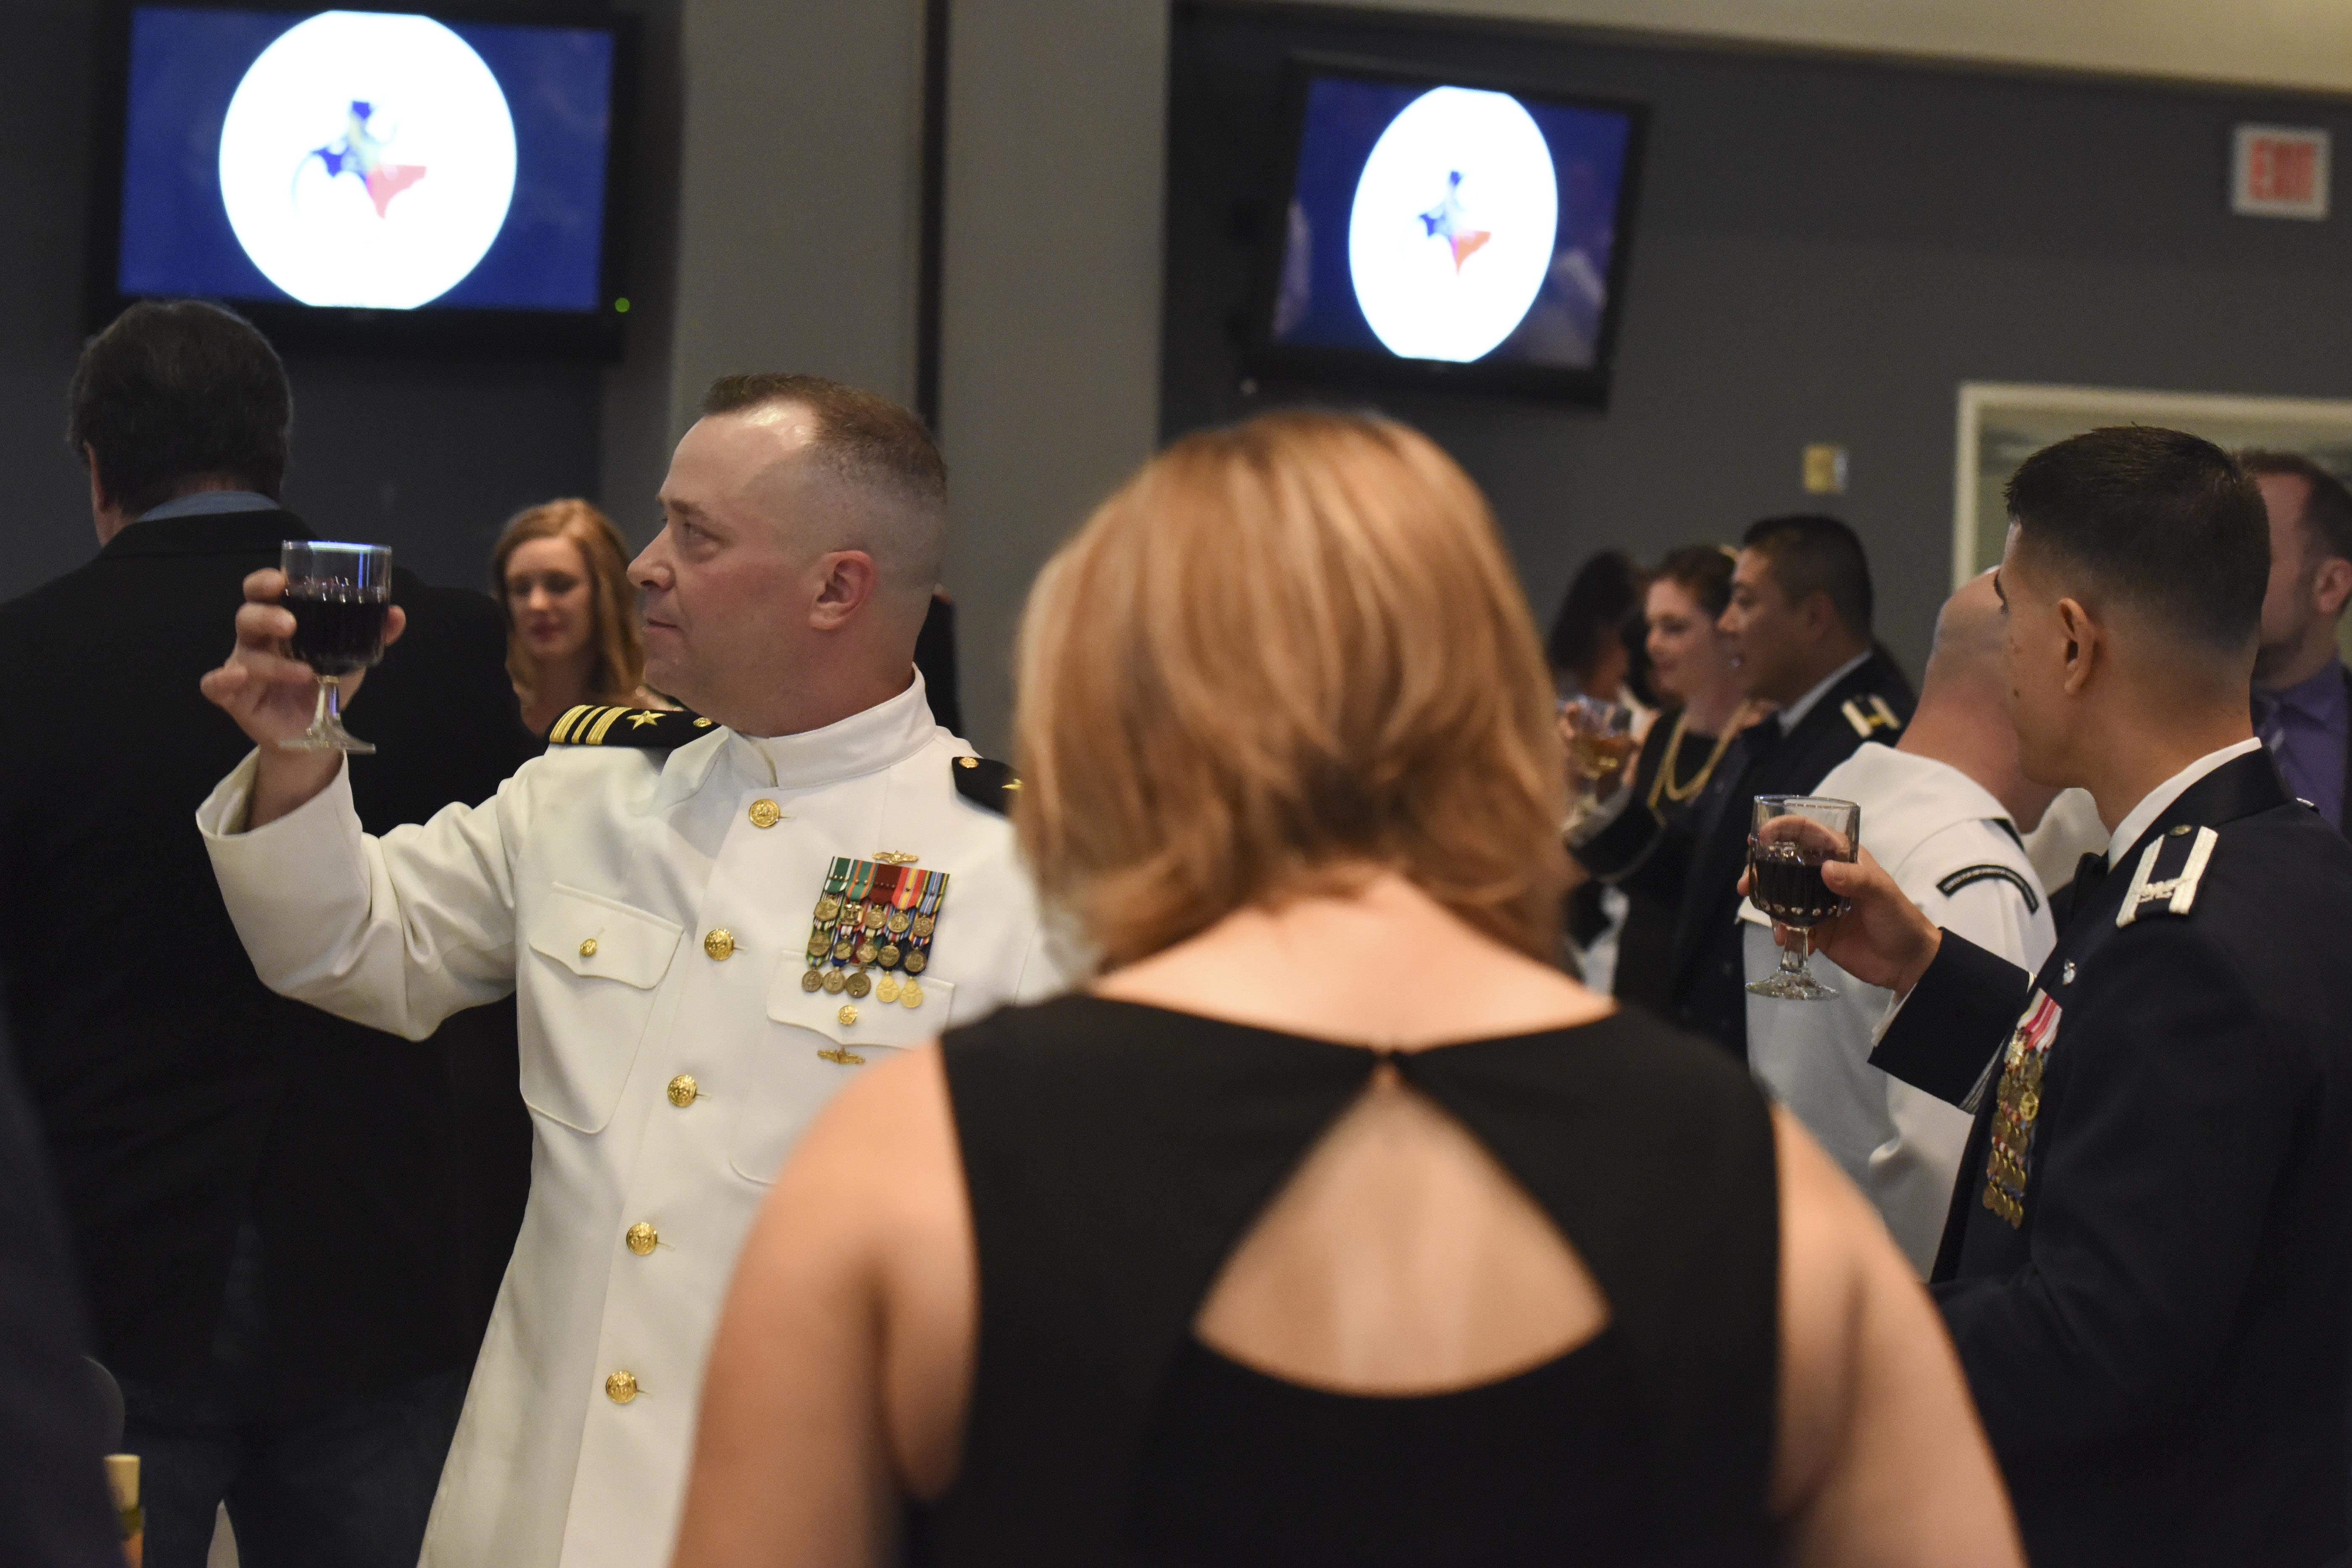 Celebrating traditions at the Navy Ball > Goodfellow Air Force Base